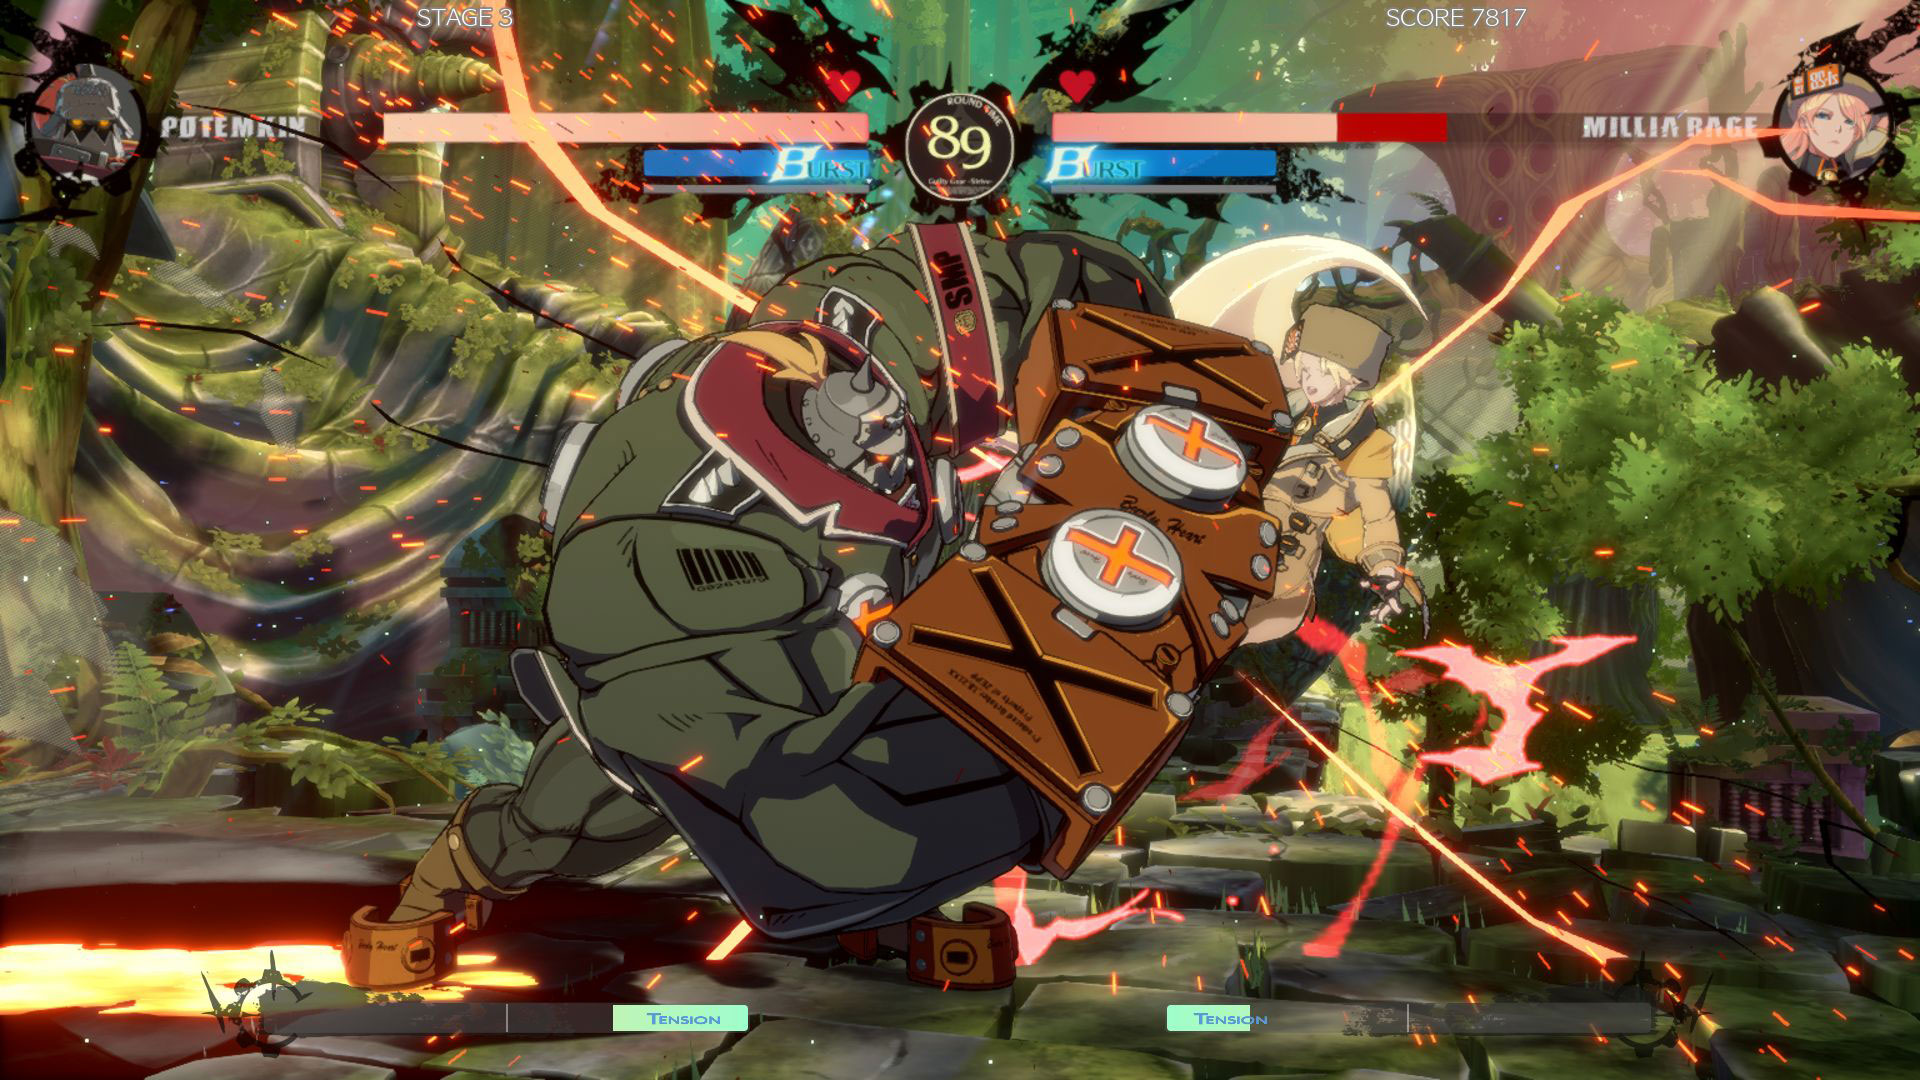 Guilty Gear Strive's online tower system could revolutionize how fighting games  rank players moving forward with a few tweaks